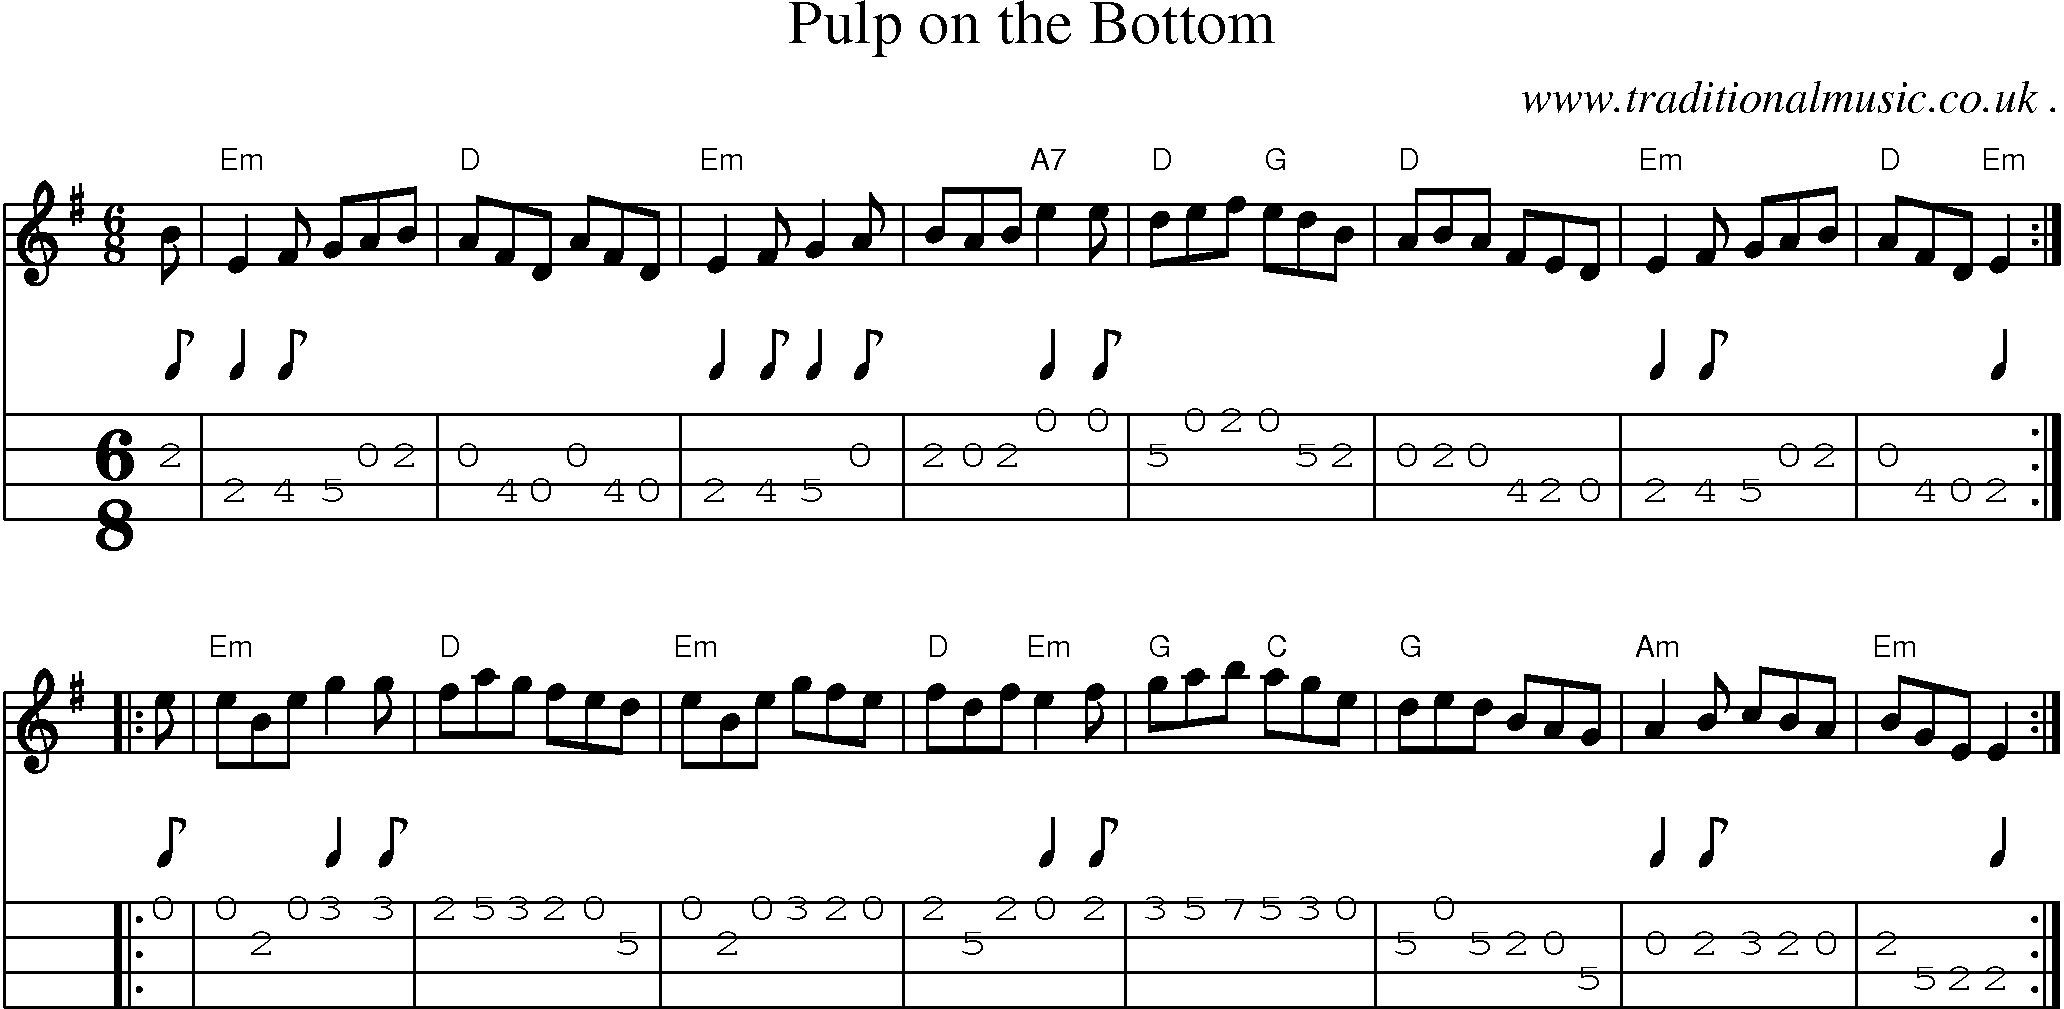 Sheet-music  score, Chords and Mandolin Tabs for Pulp On The Bottom